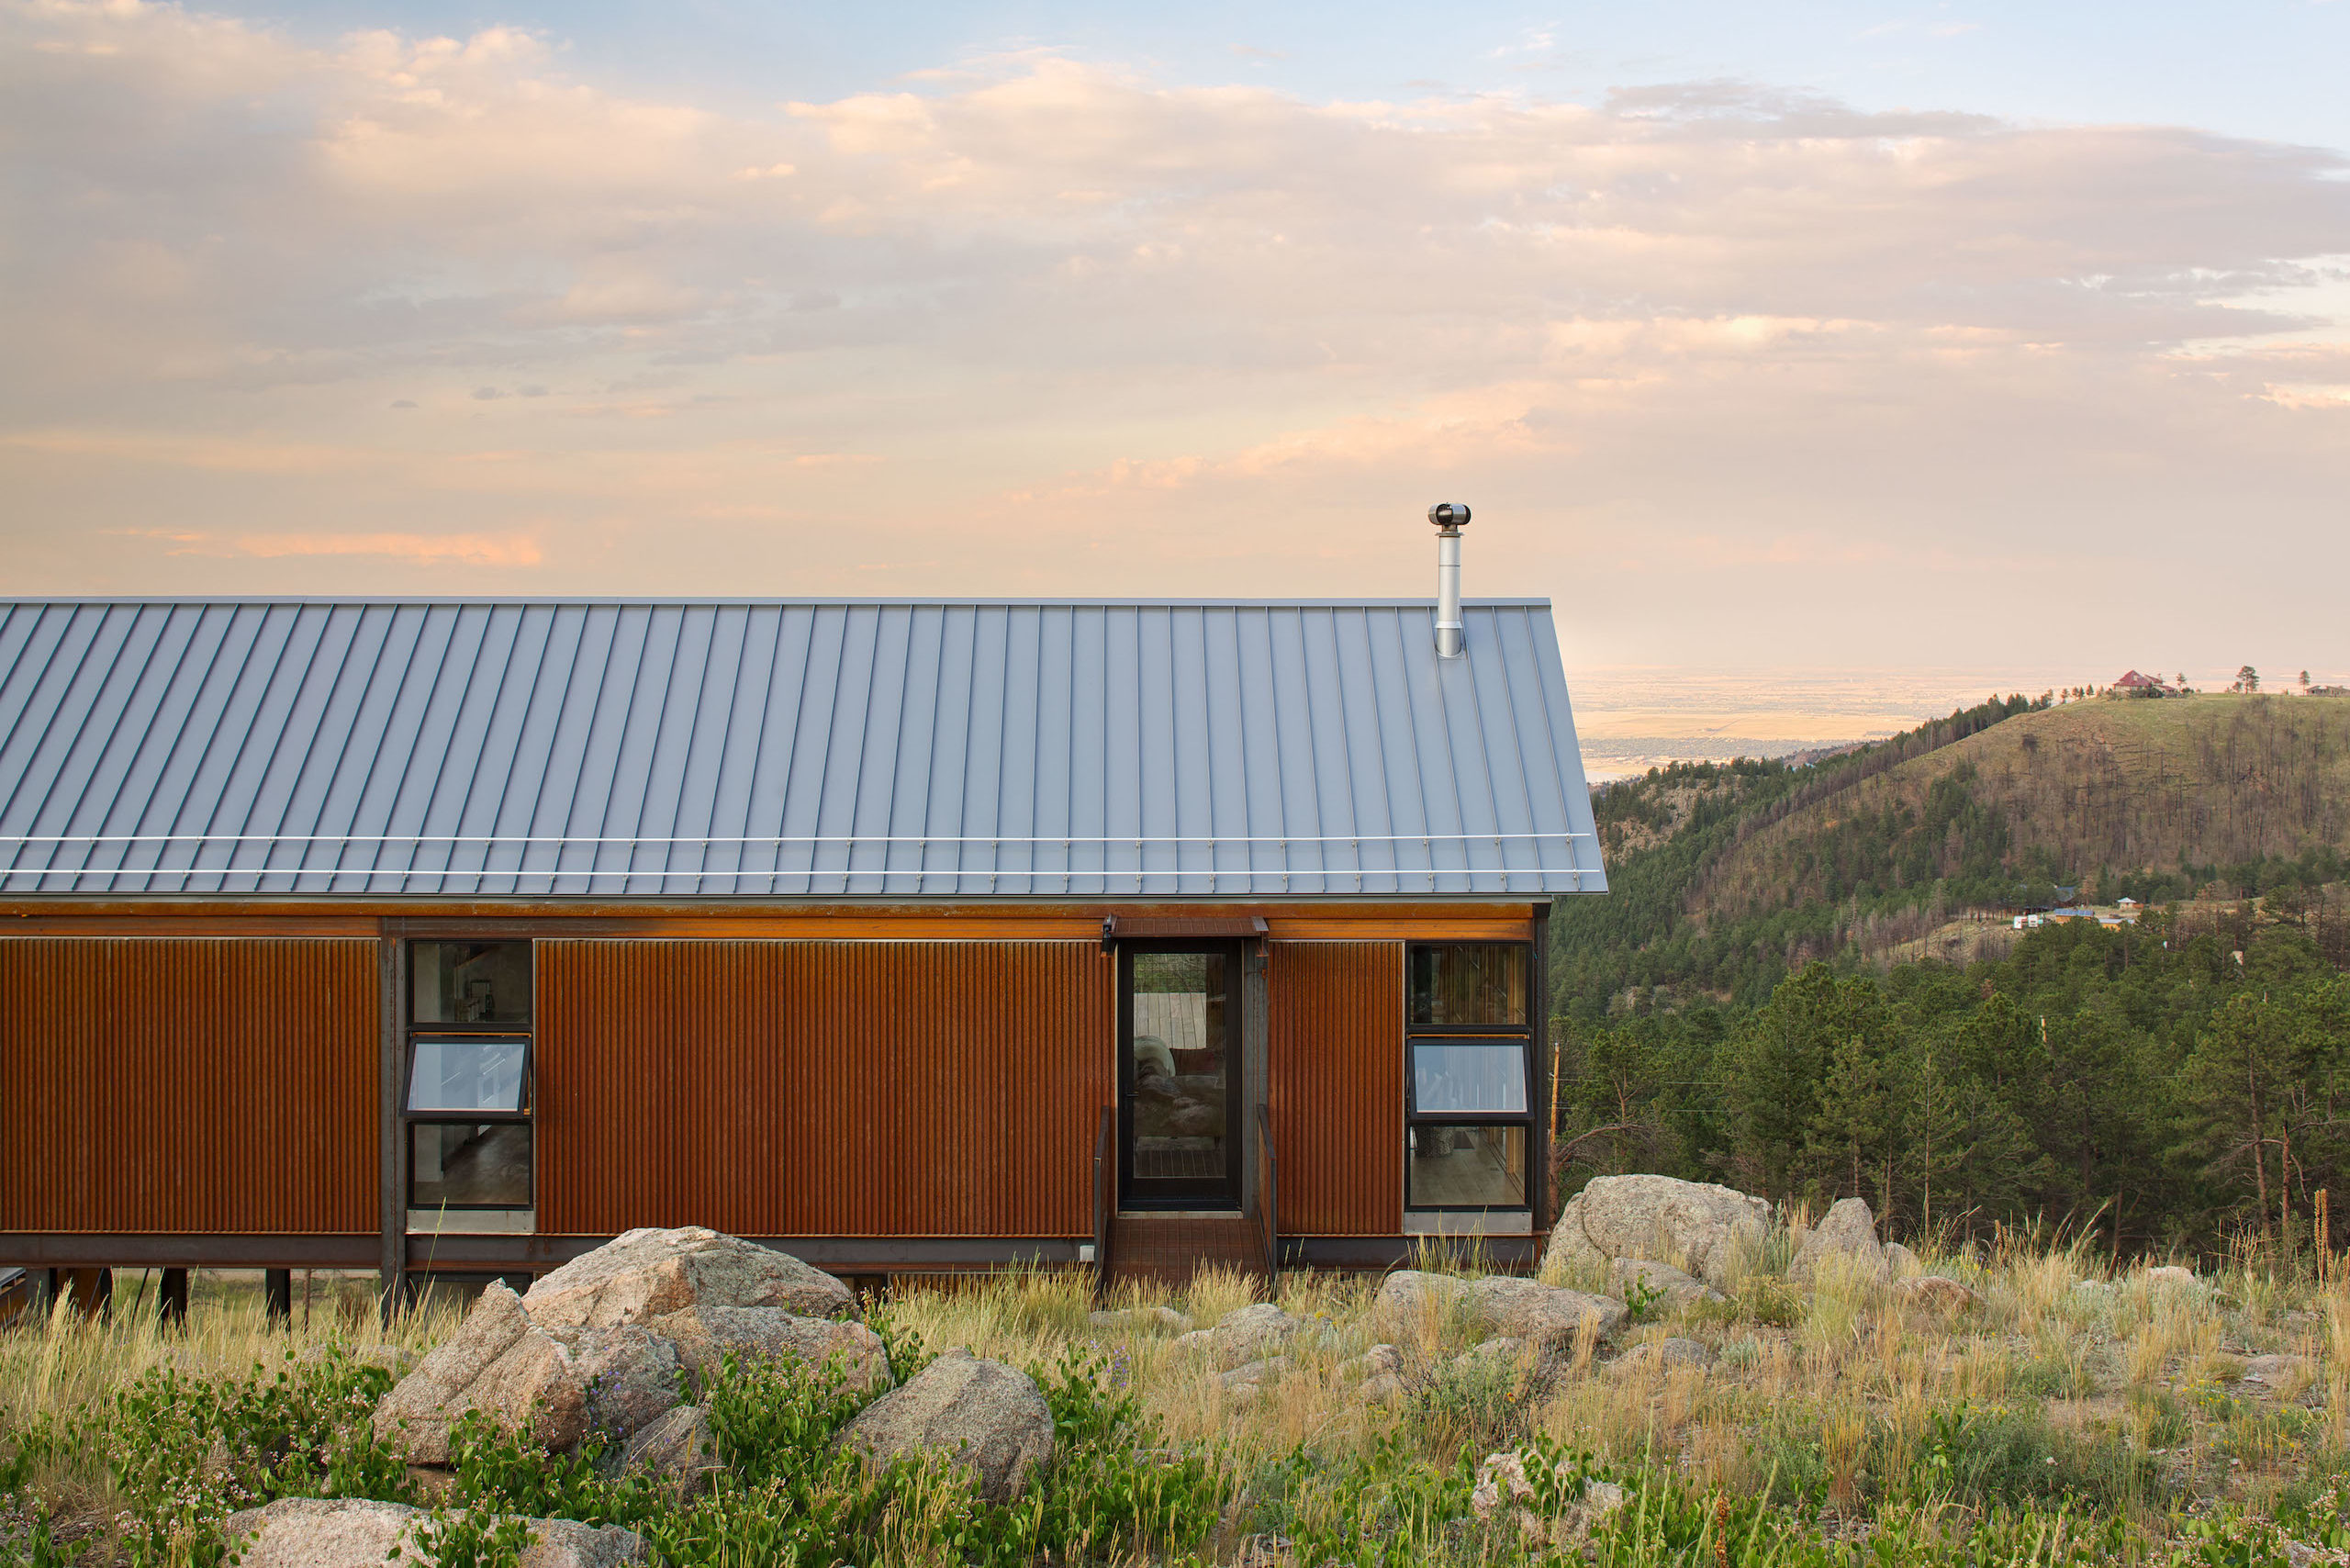 Sunset at Sunshine Canyon House by Renée del Gaudio Architecture.